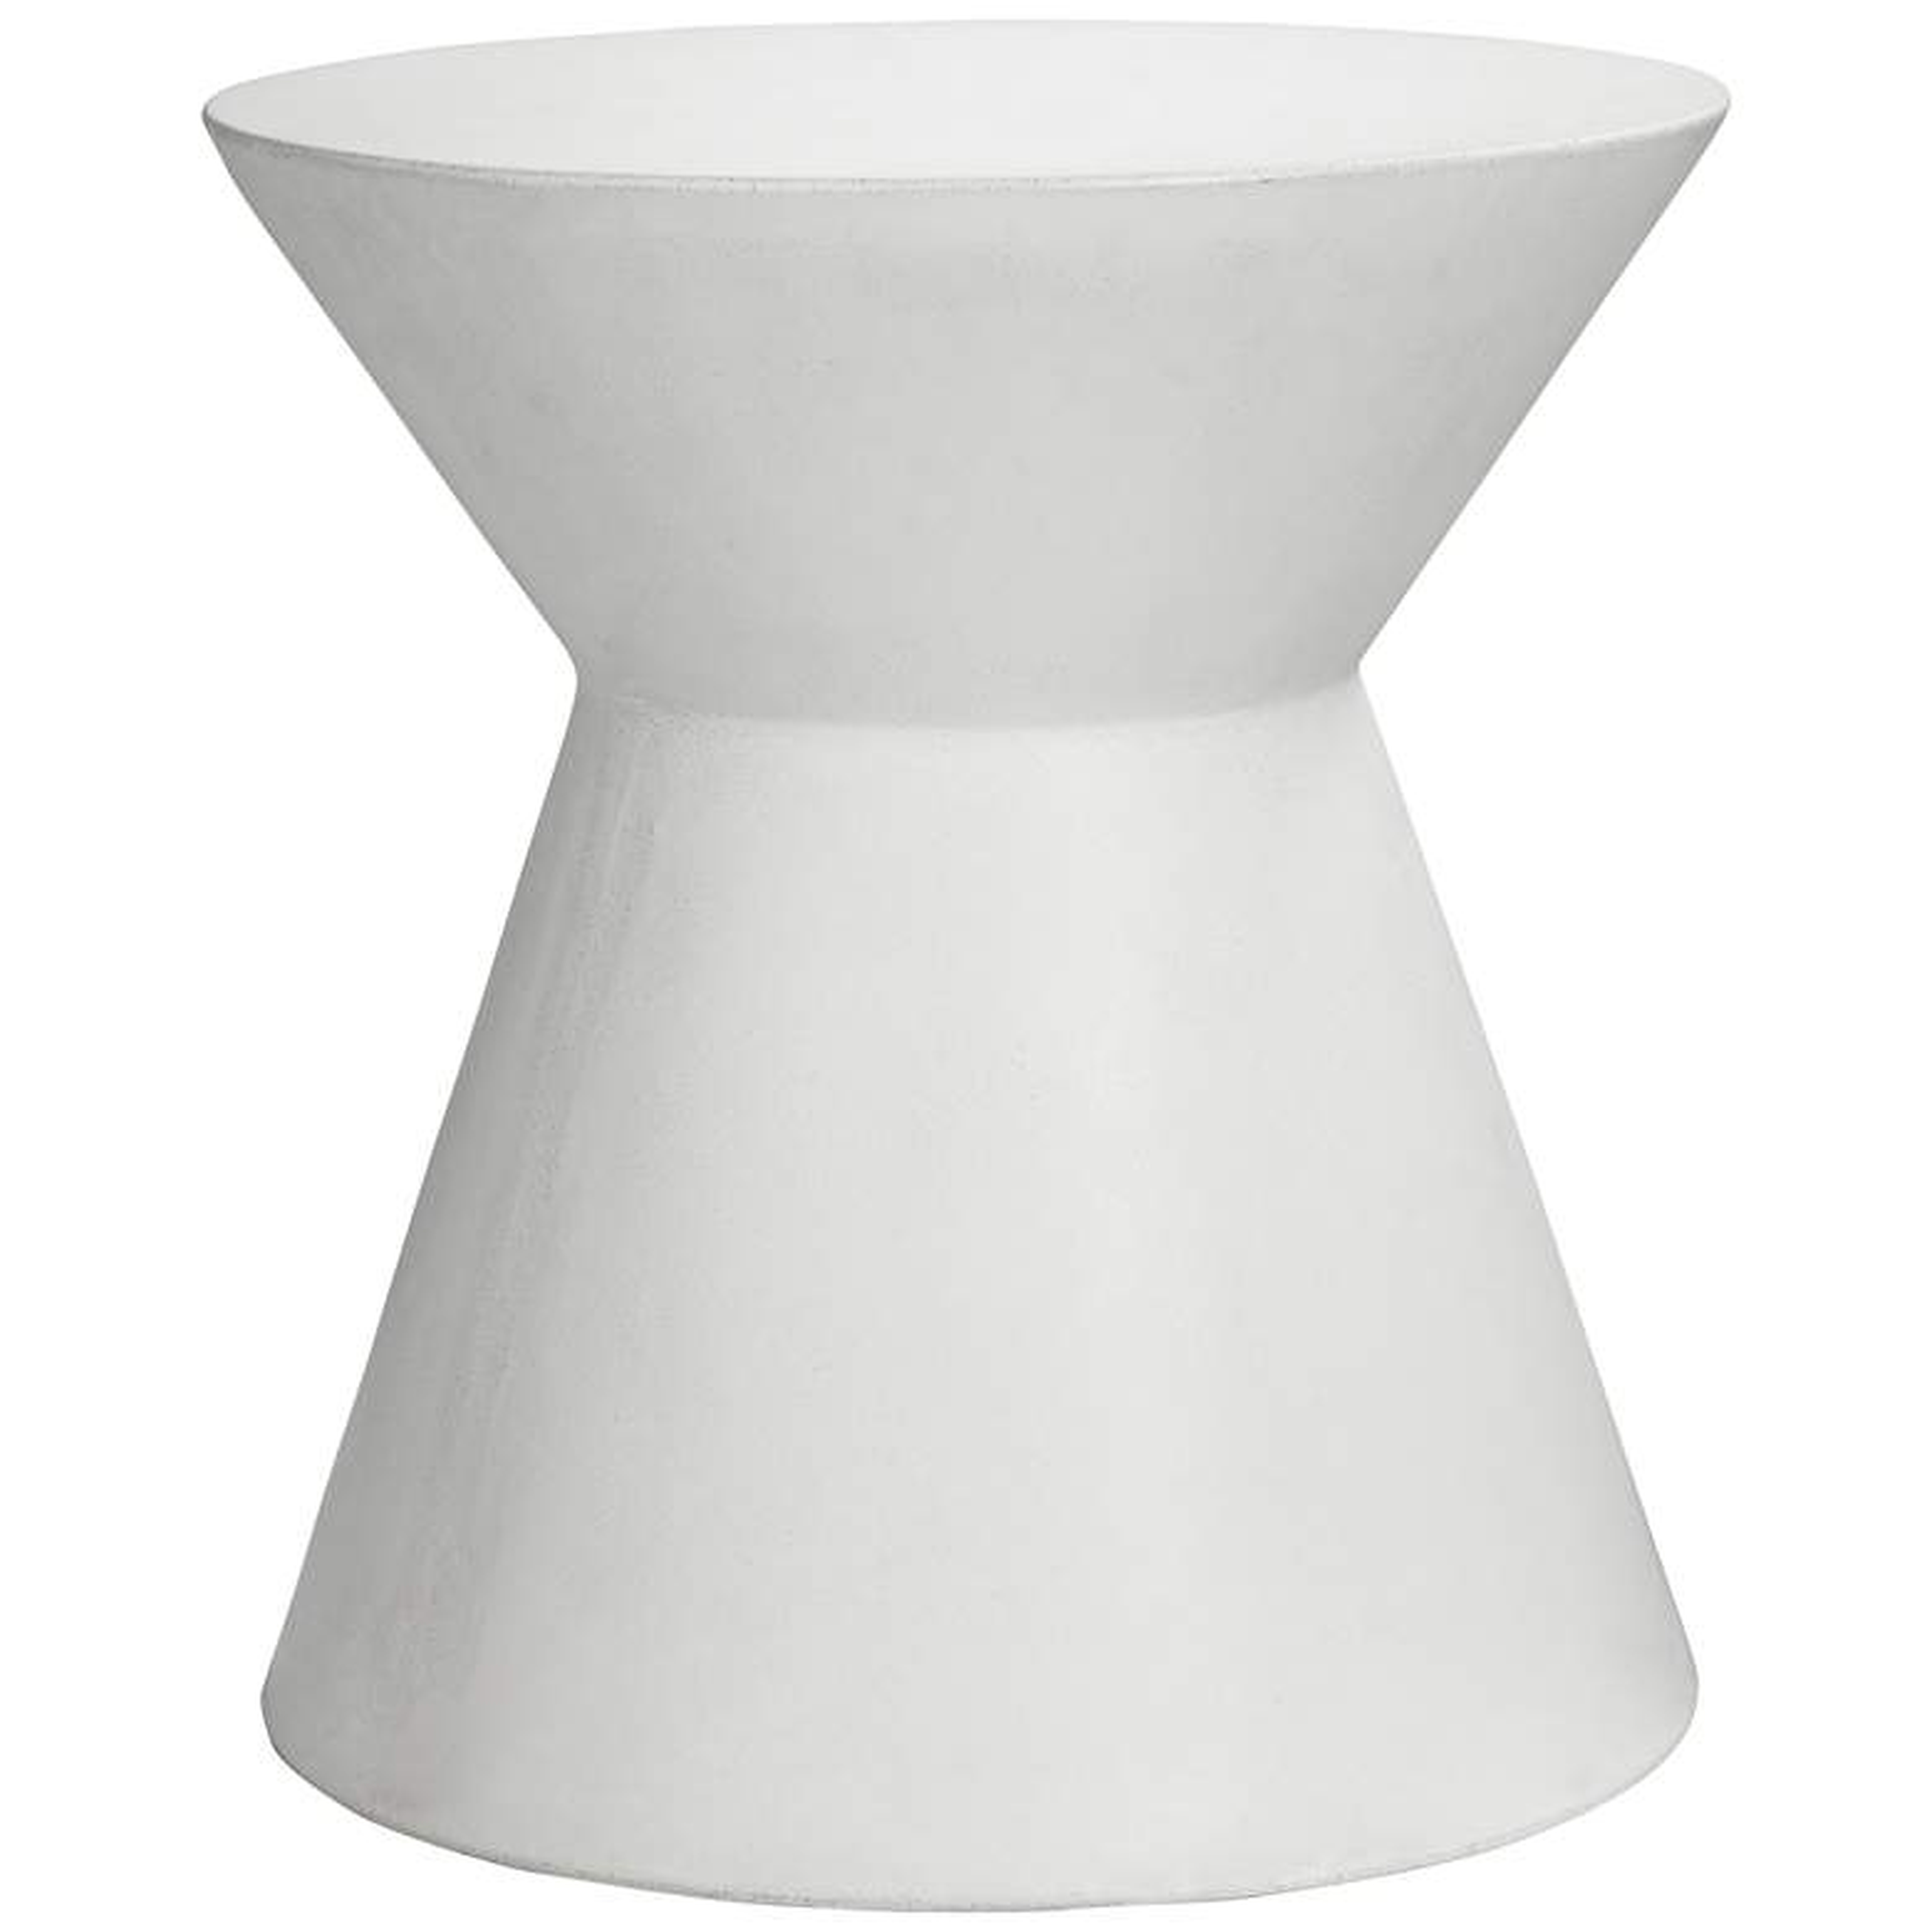 Astley Round White Concrete Indoor-Outdoor End Table - Style # 14F23 - Lamps Plus